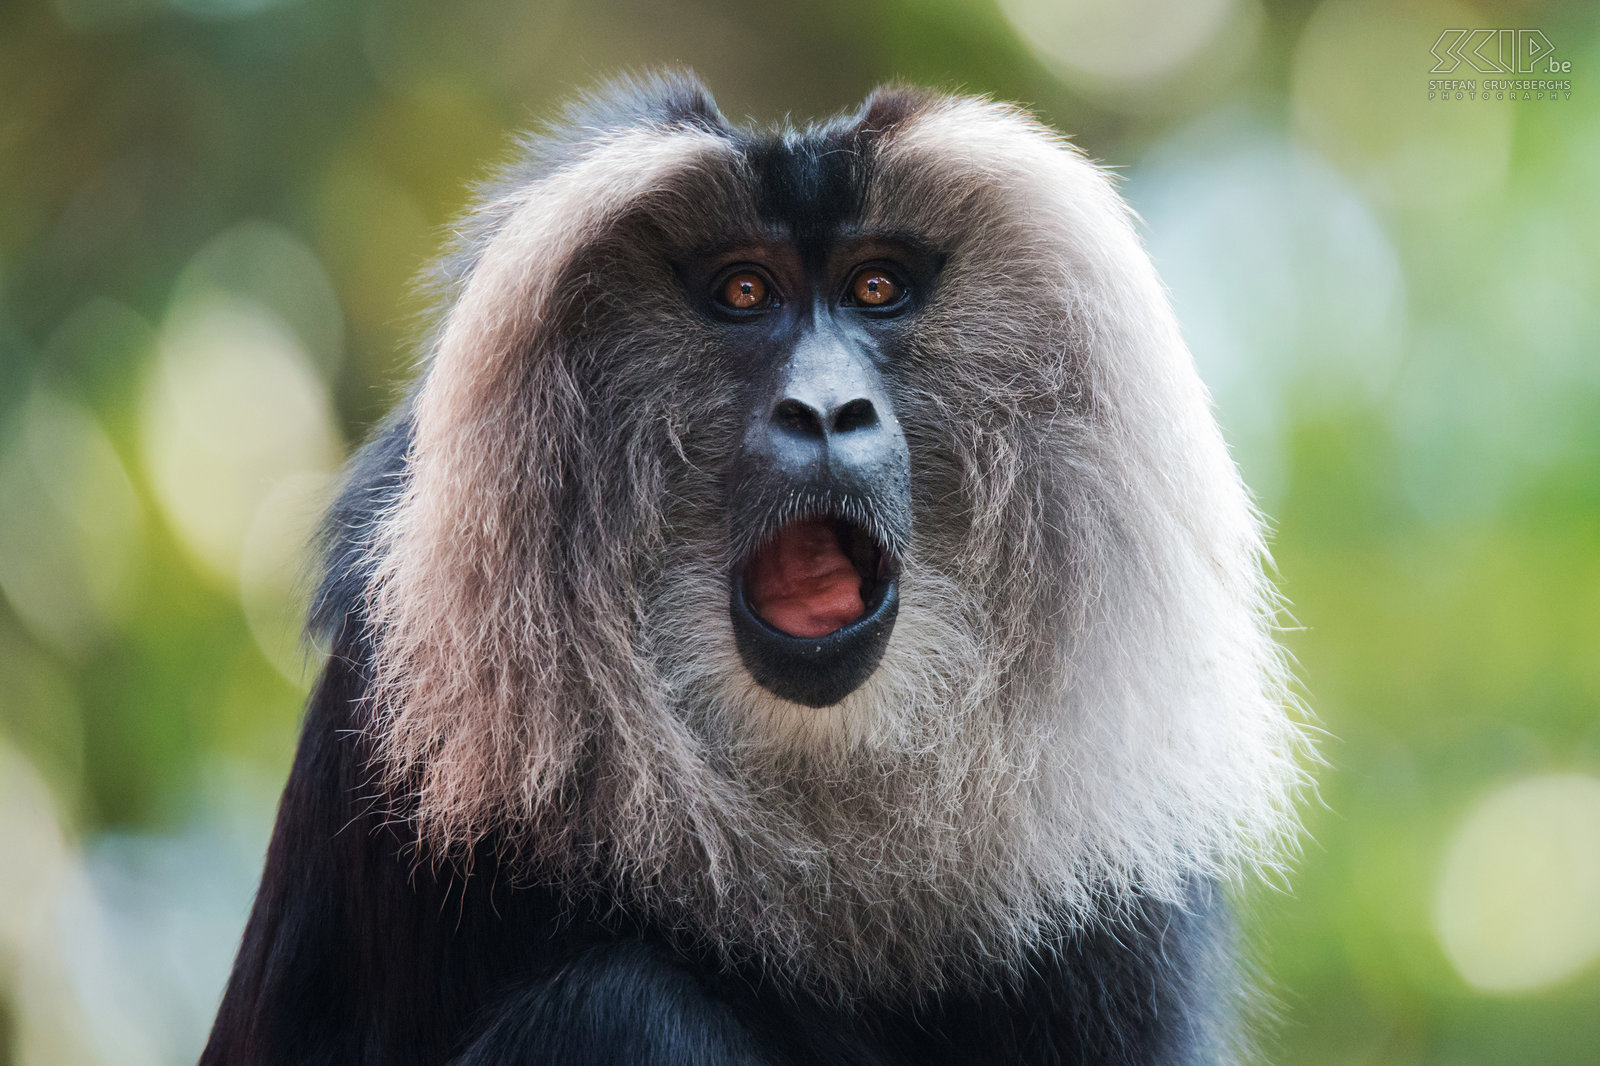 Valparai - Lion-tailed macaque The  lion-tailed macaque's outstanding characteristic are the silver-white manes around the head. They have a body length of 42cm to 61cm. They live in large groups and feed on a large variety of fruit trees and sometimes insects. Stefan Cruysberghs